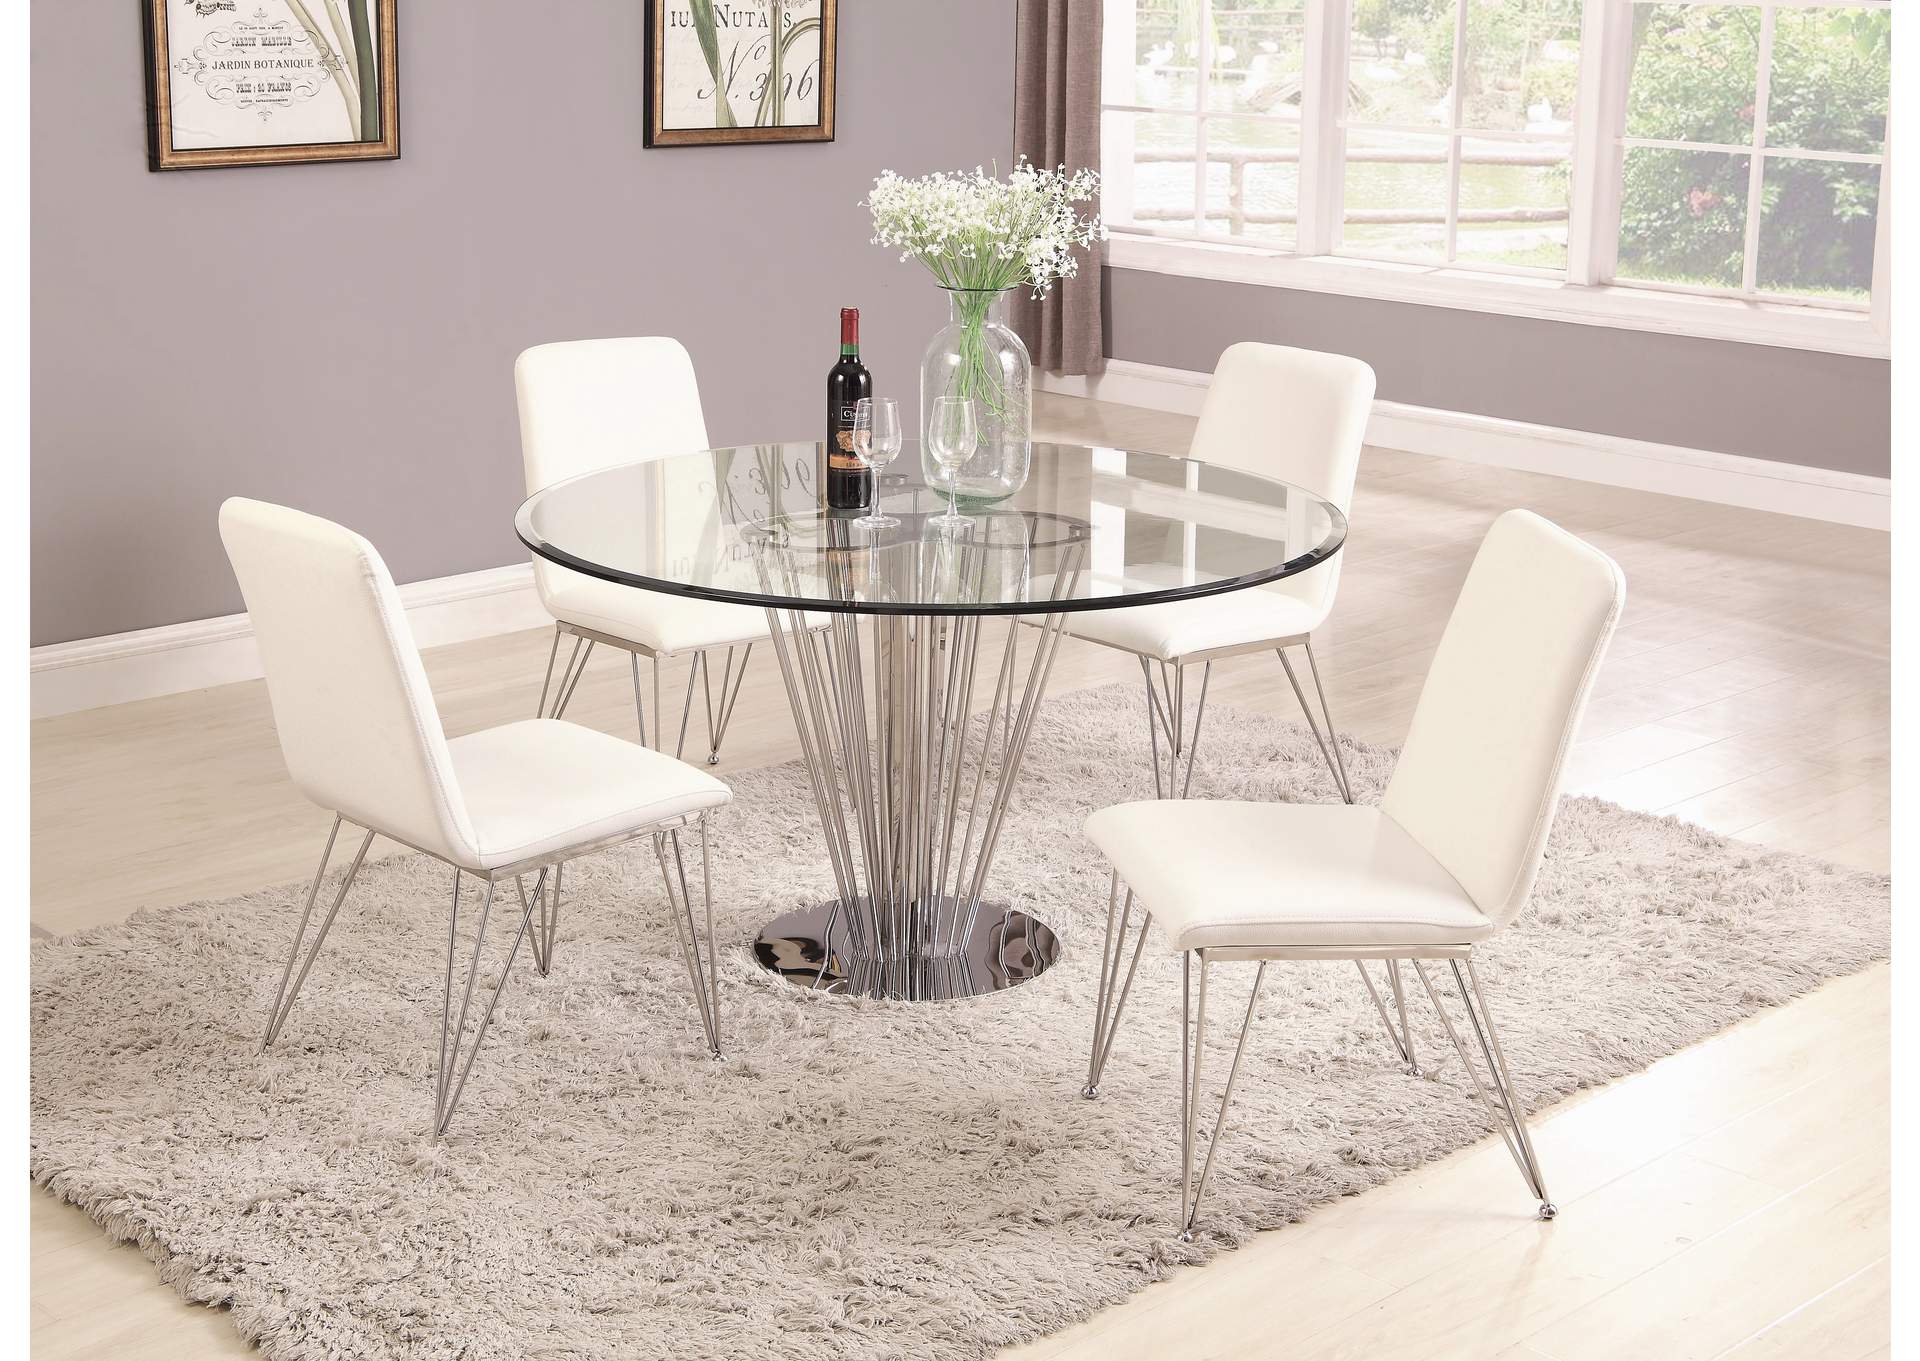 Fernanda White Dining Set w/ Round Glass Table & 4 White Side Chairs,Chintaly Imports